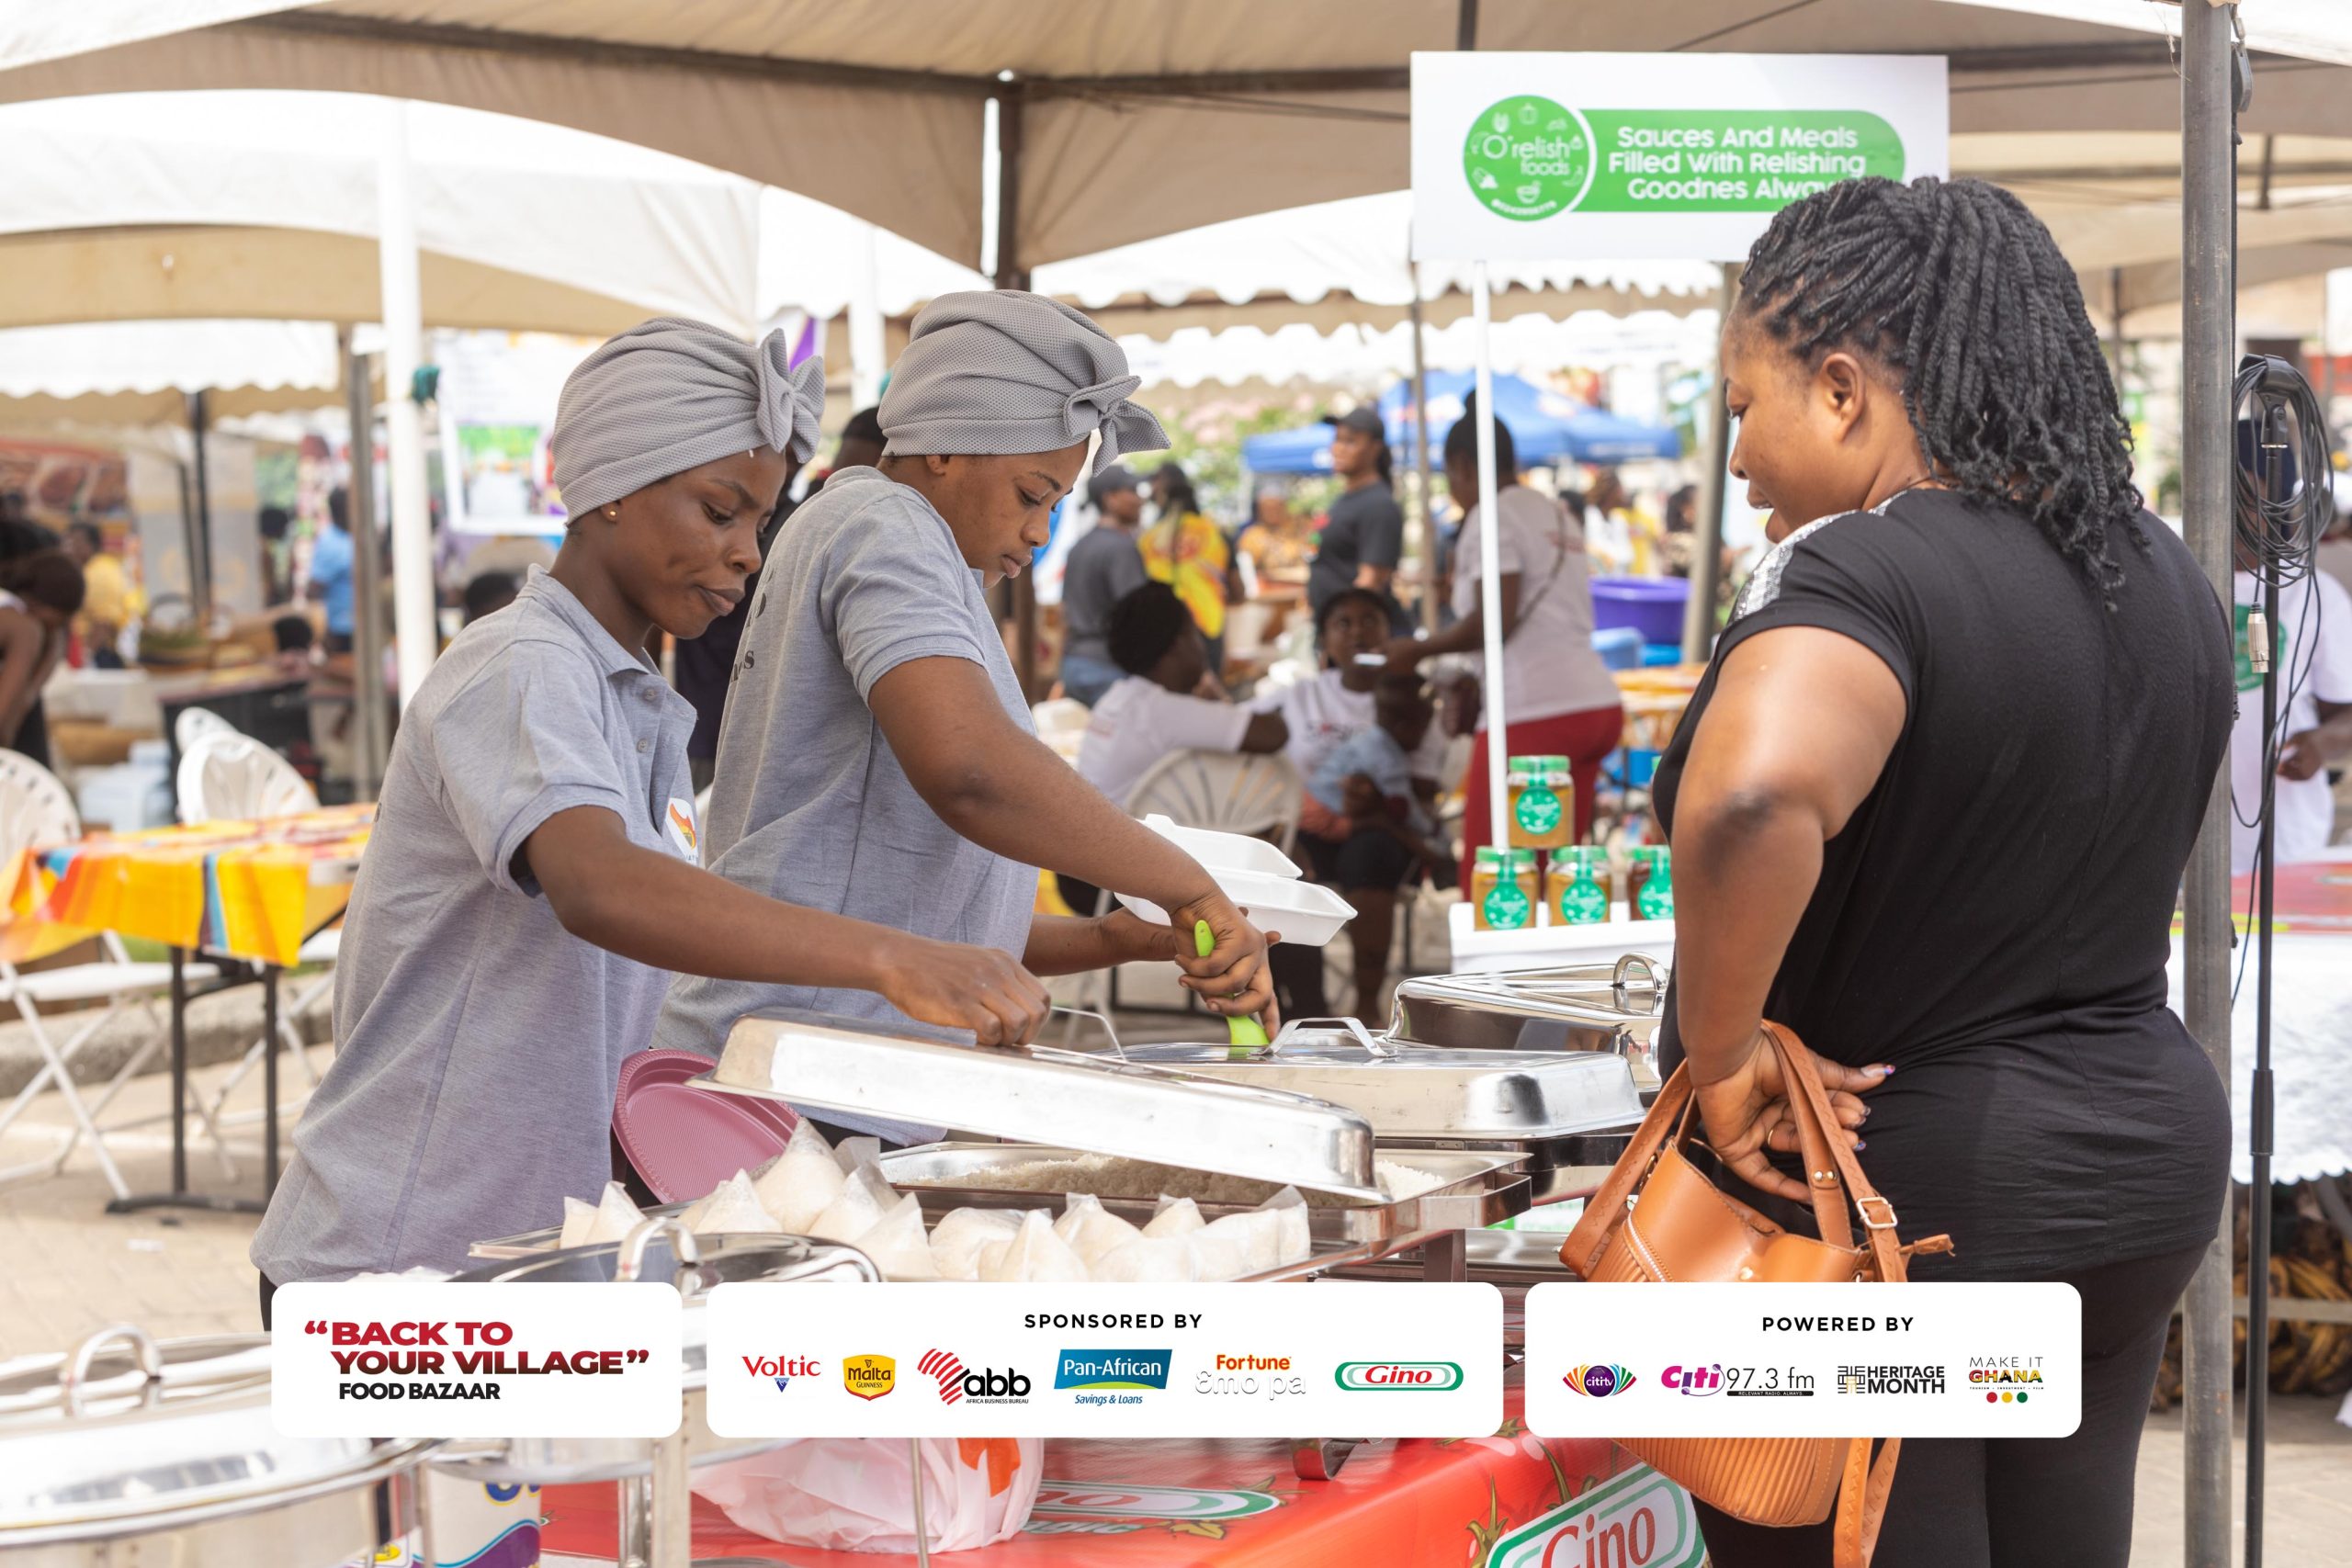 Patrons anxious for day two of ‘Back To Your Village’ Food Bazaar